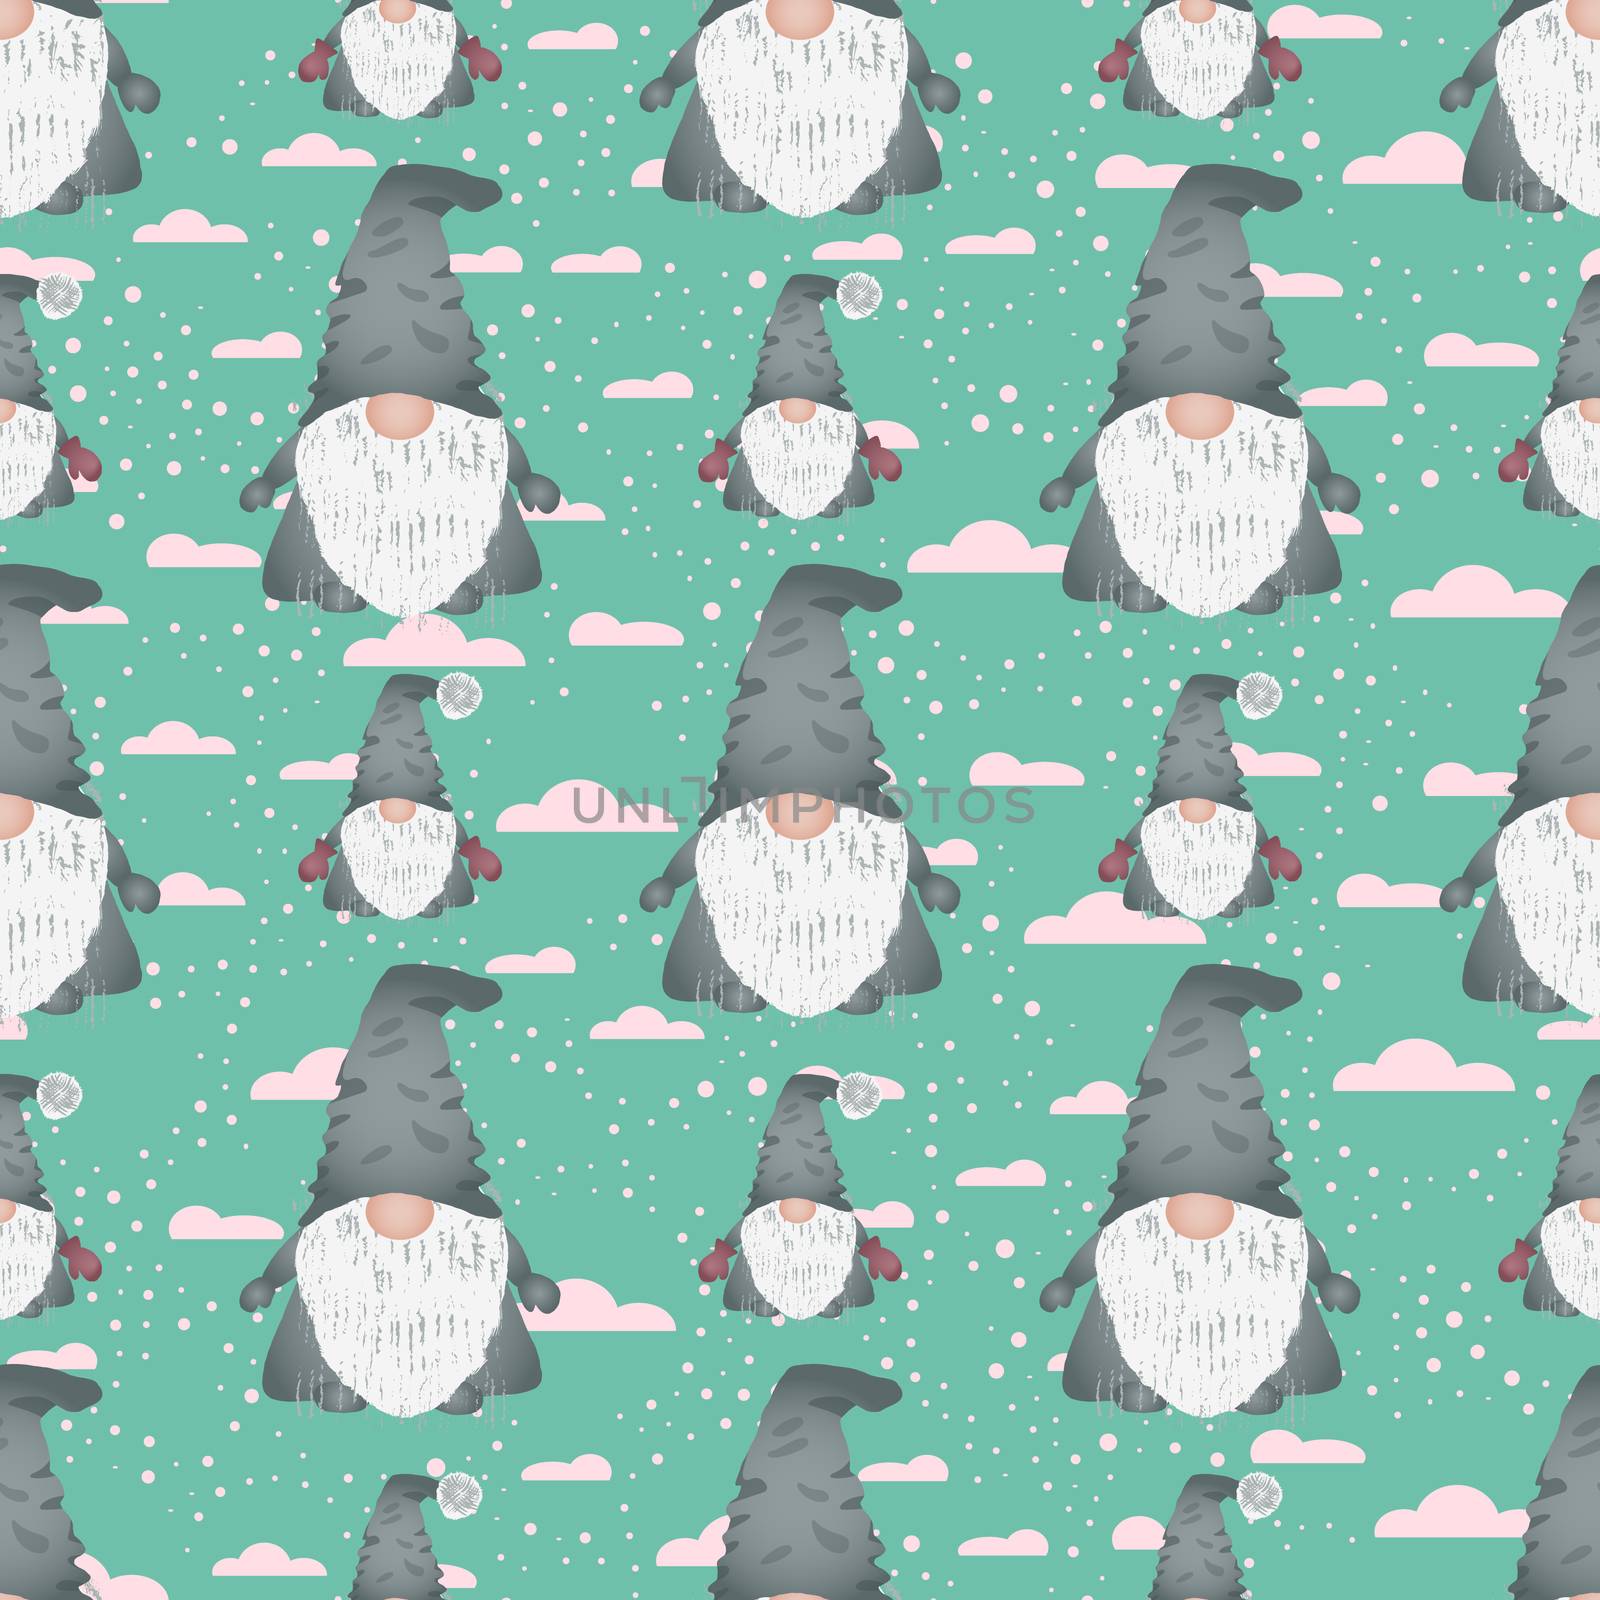 Christmas scandinavian gnomes seamless pattern on turquoise. Winter scene with snowflakes and dwarf or elf fairytale characters. Wallpaper, textile, wrapping paper design. Vector illustration.